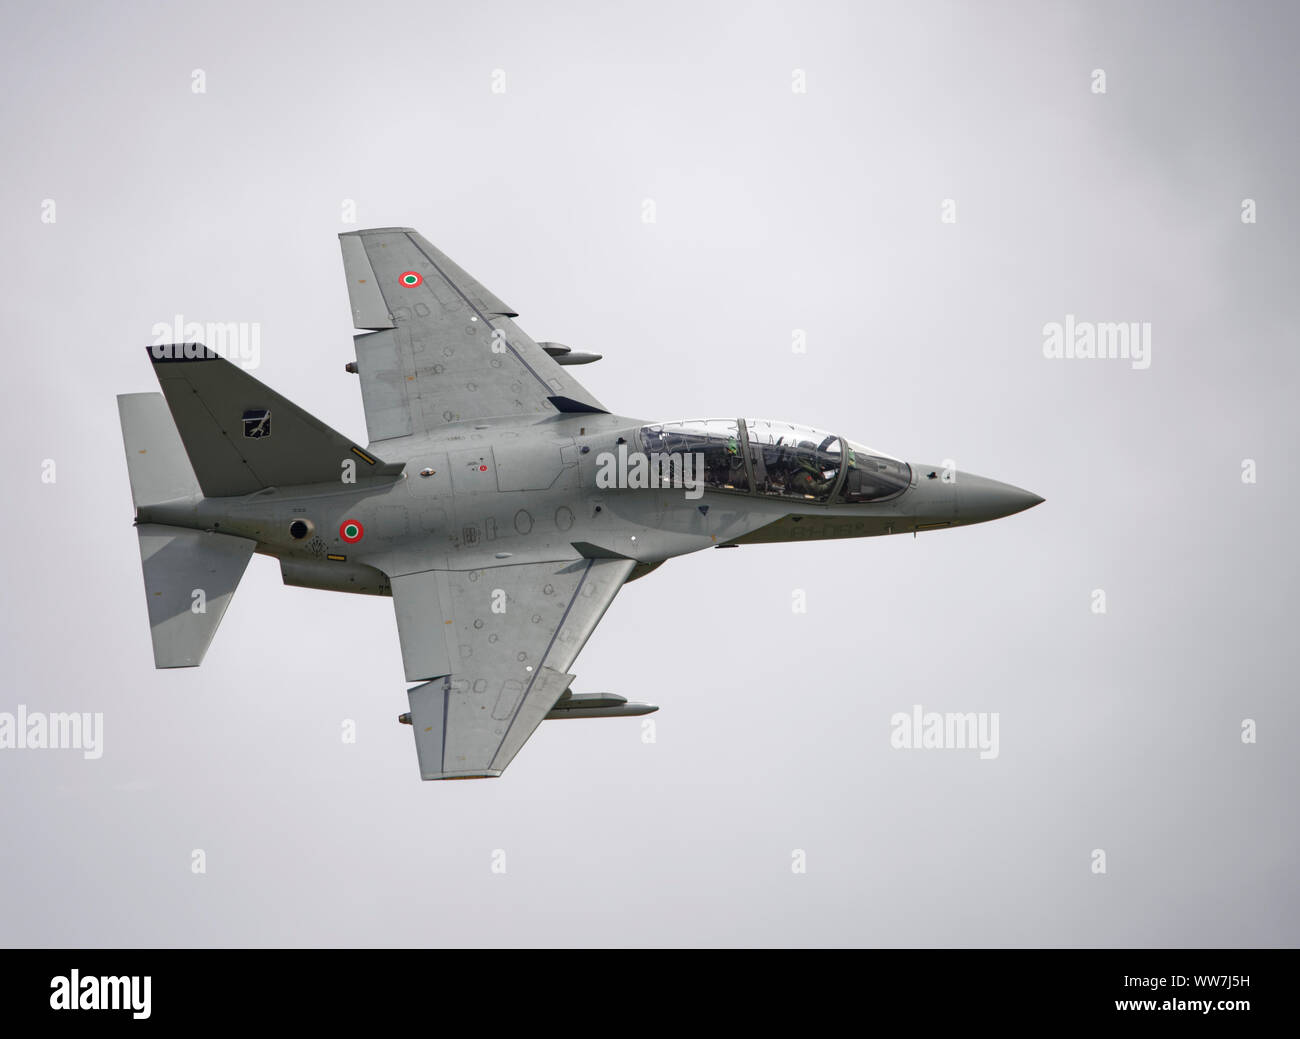 This T-346A Leonardo / Alenia Airmacchi Military Jet Trainer is the Italian Air Force version of the M-346 Training aircraft. seen here at the RIAT Stock Photo